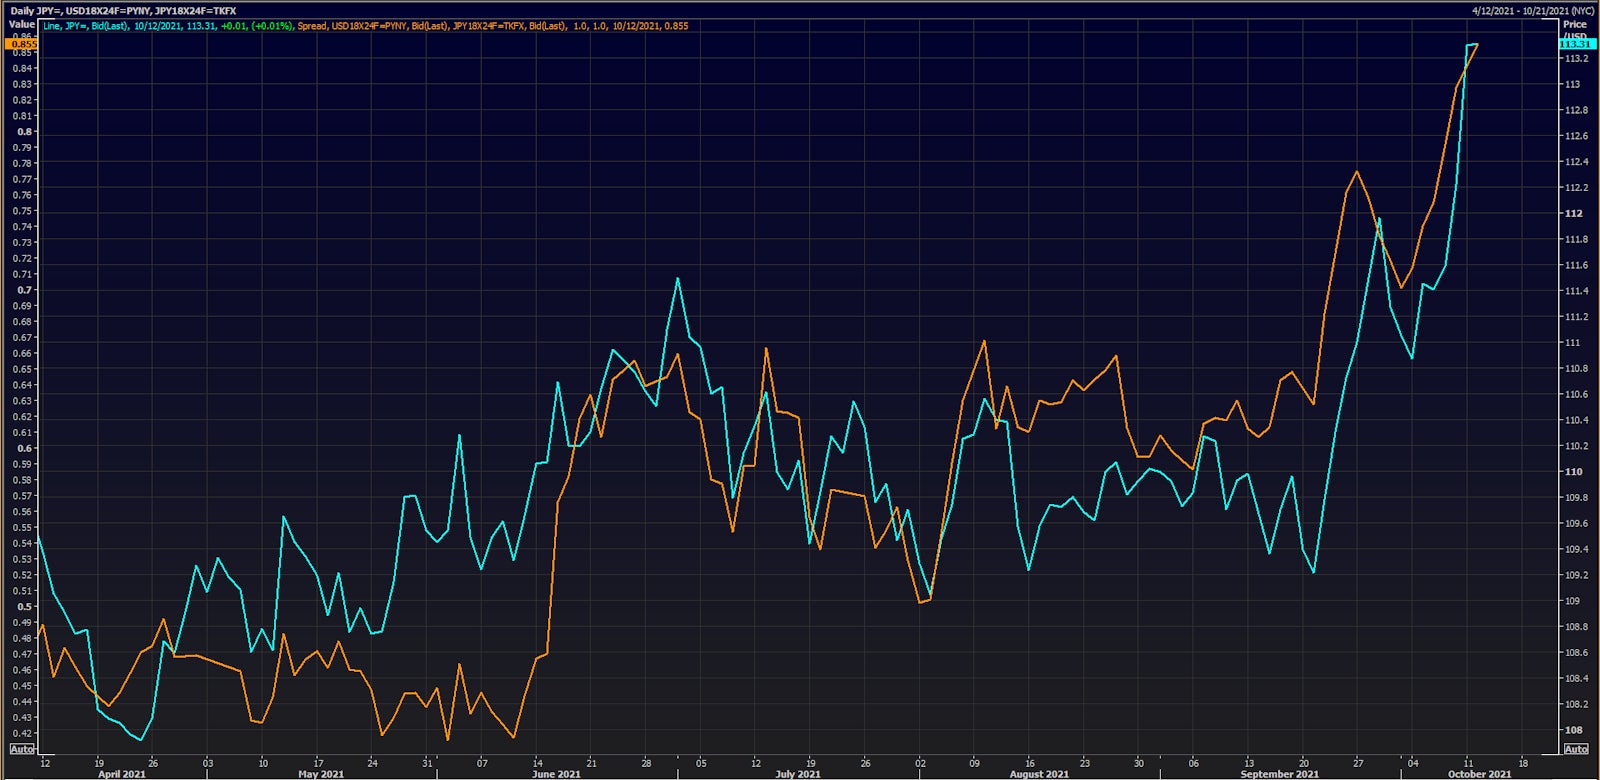 JPY Spot Rate vs 18-months forward 6-month US-JP rates differential | Source: Refinitiv